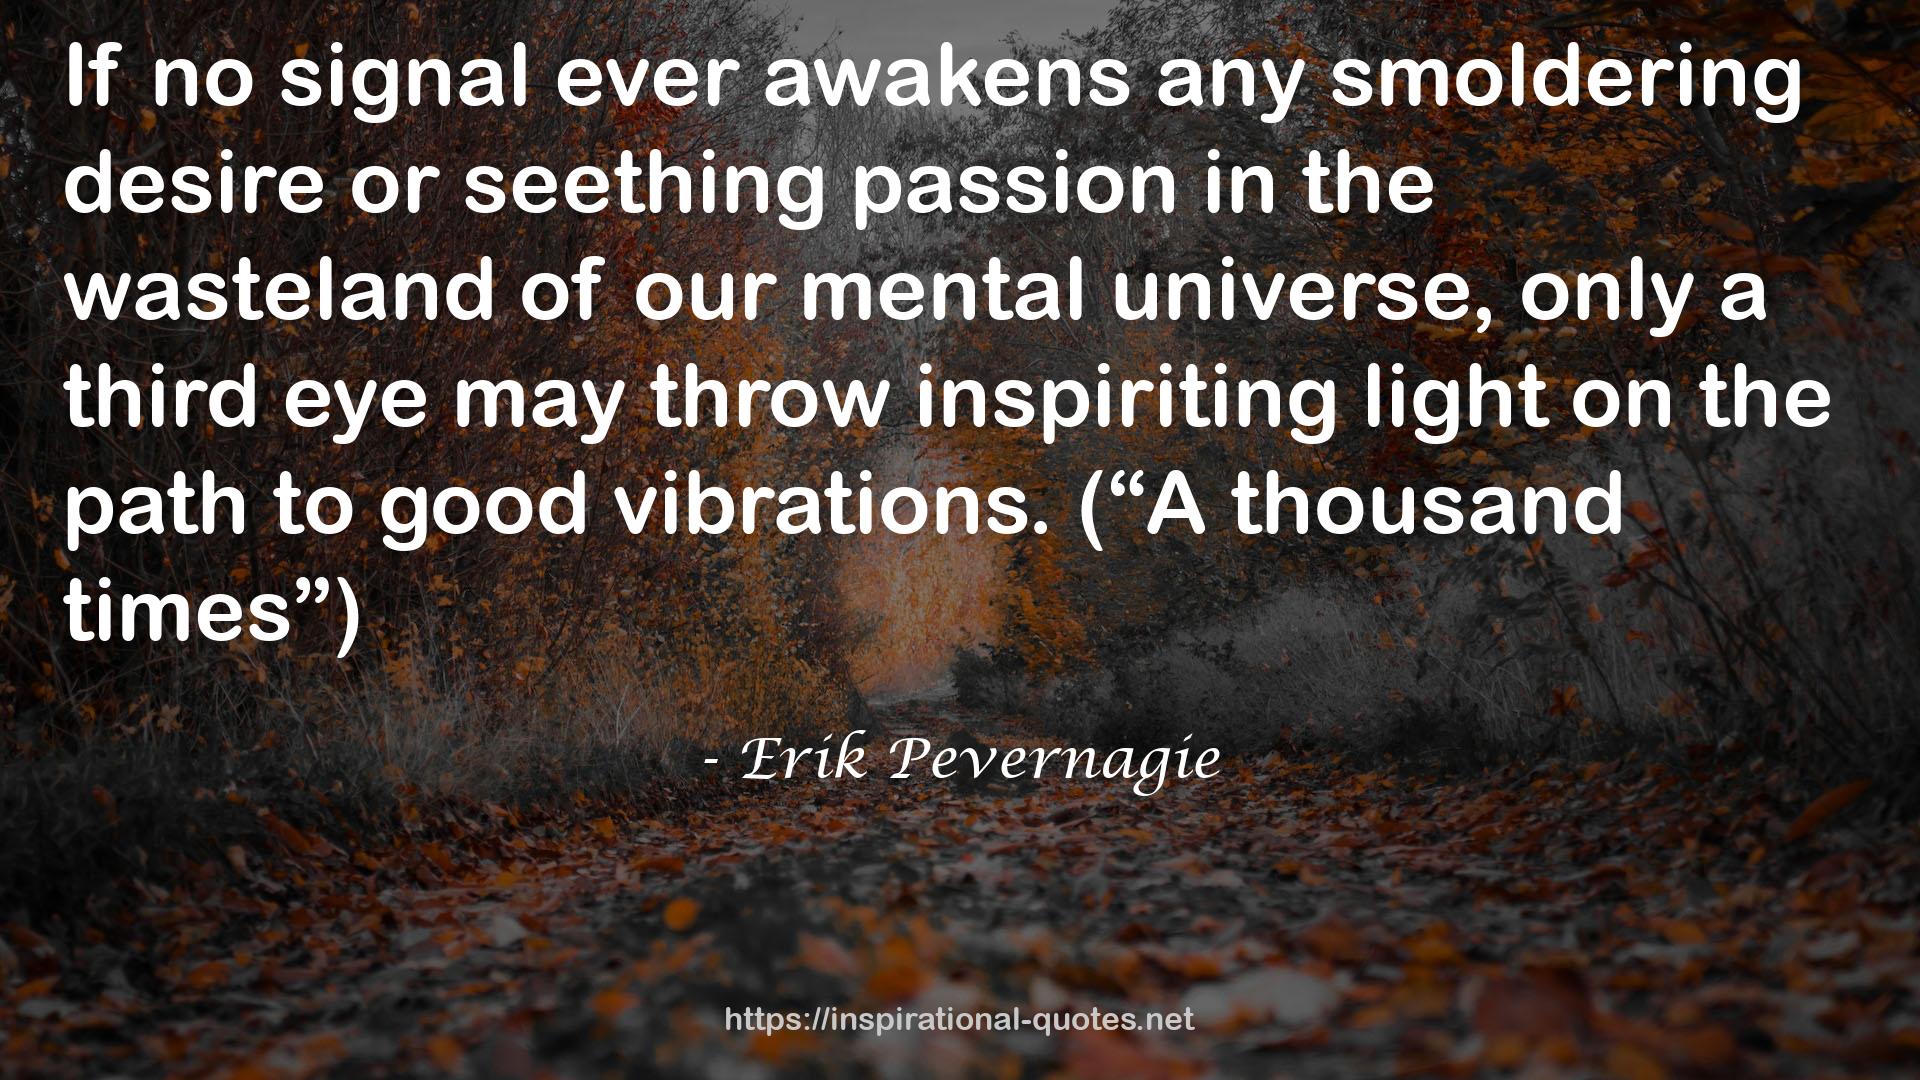 seething passion  QUOTES